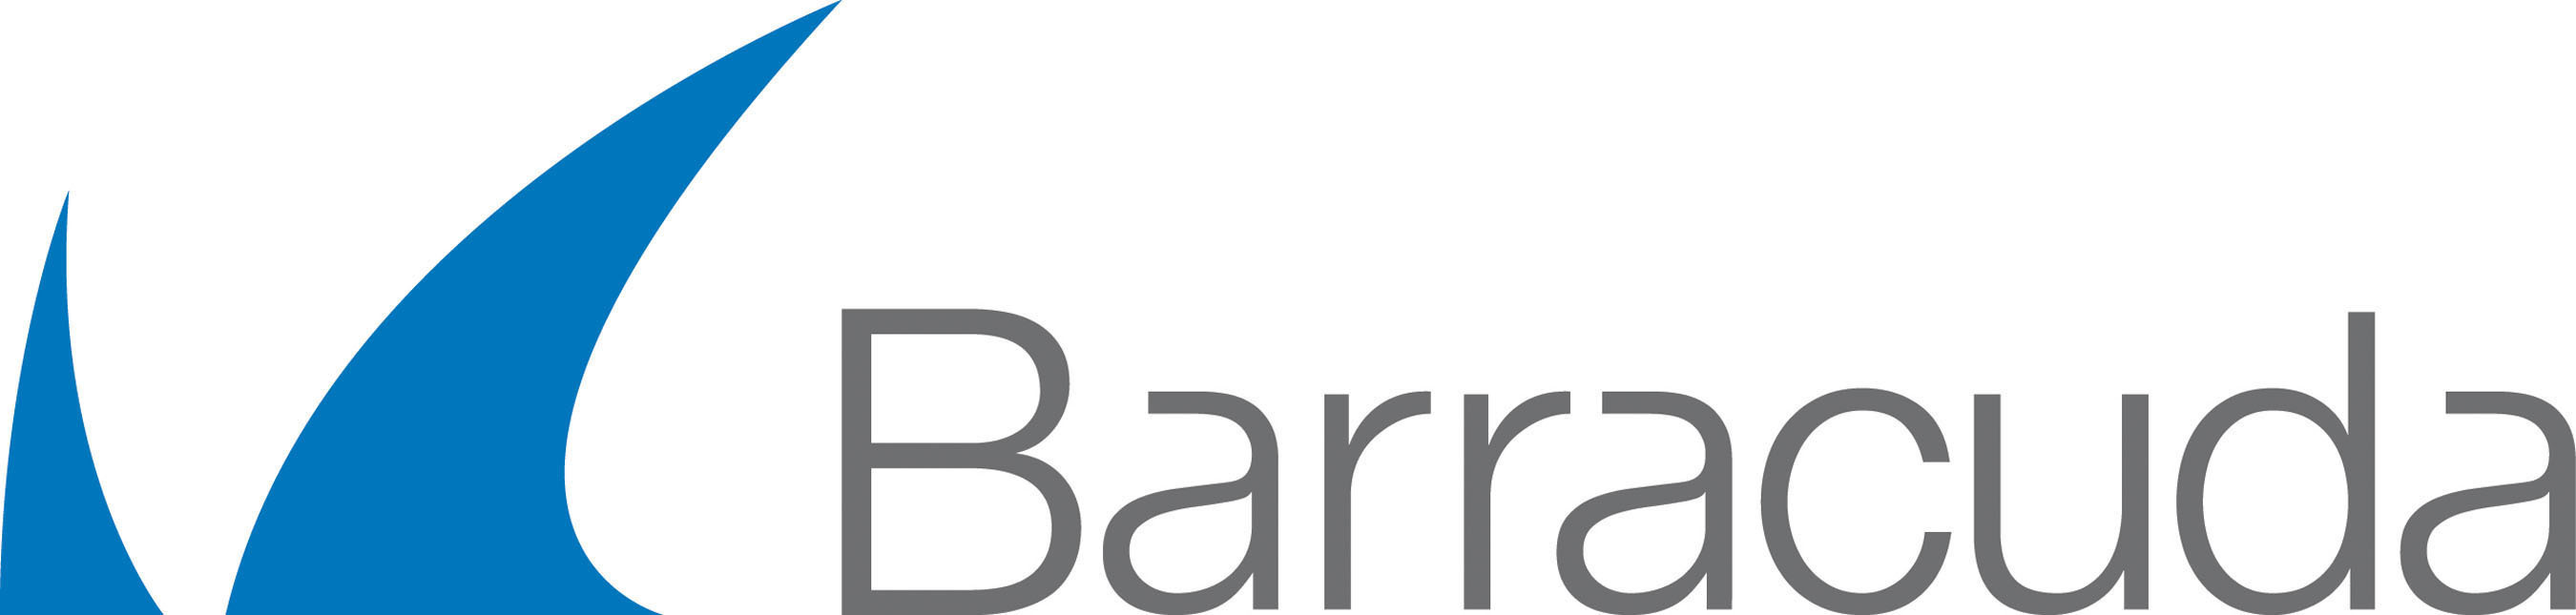 Barracuda Begins Roll Out Of Saas Cloud To Cloud Backup Starting With Support For Microsoft Office 365 Environments